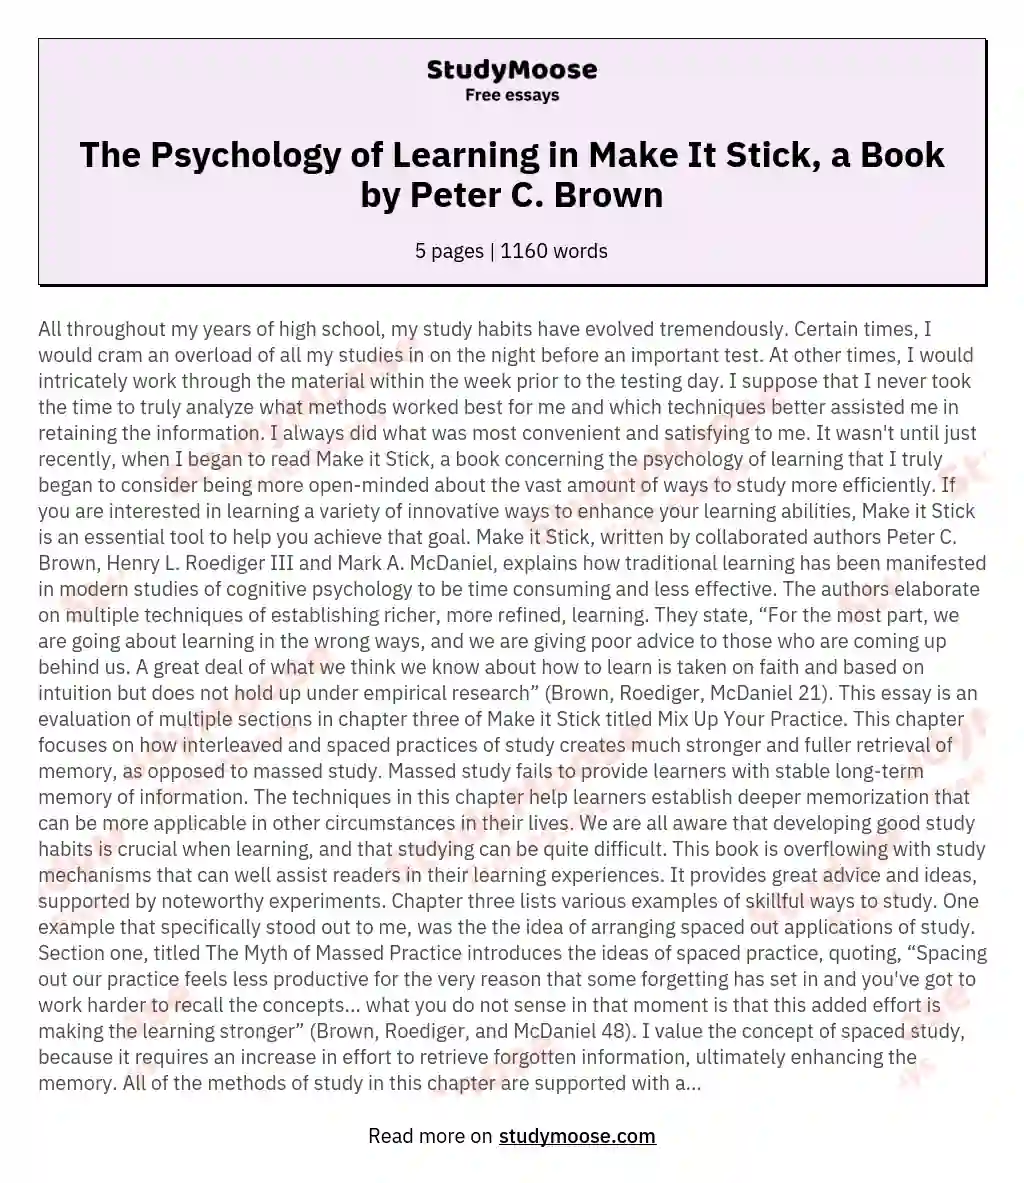 The Psychology of Learning in Make It Stick, a Book by Peter C. Brown essay